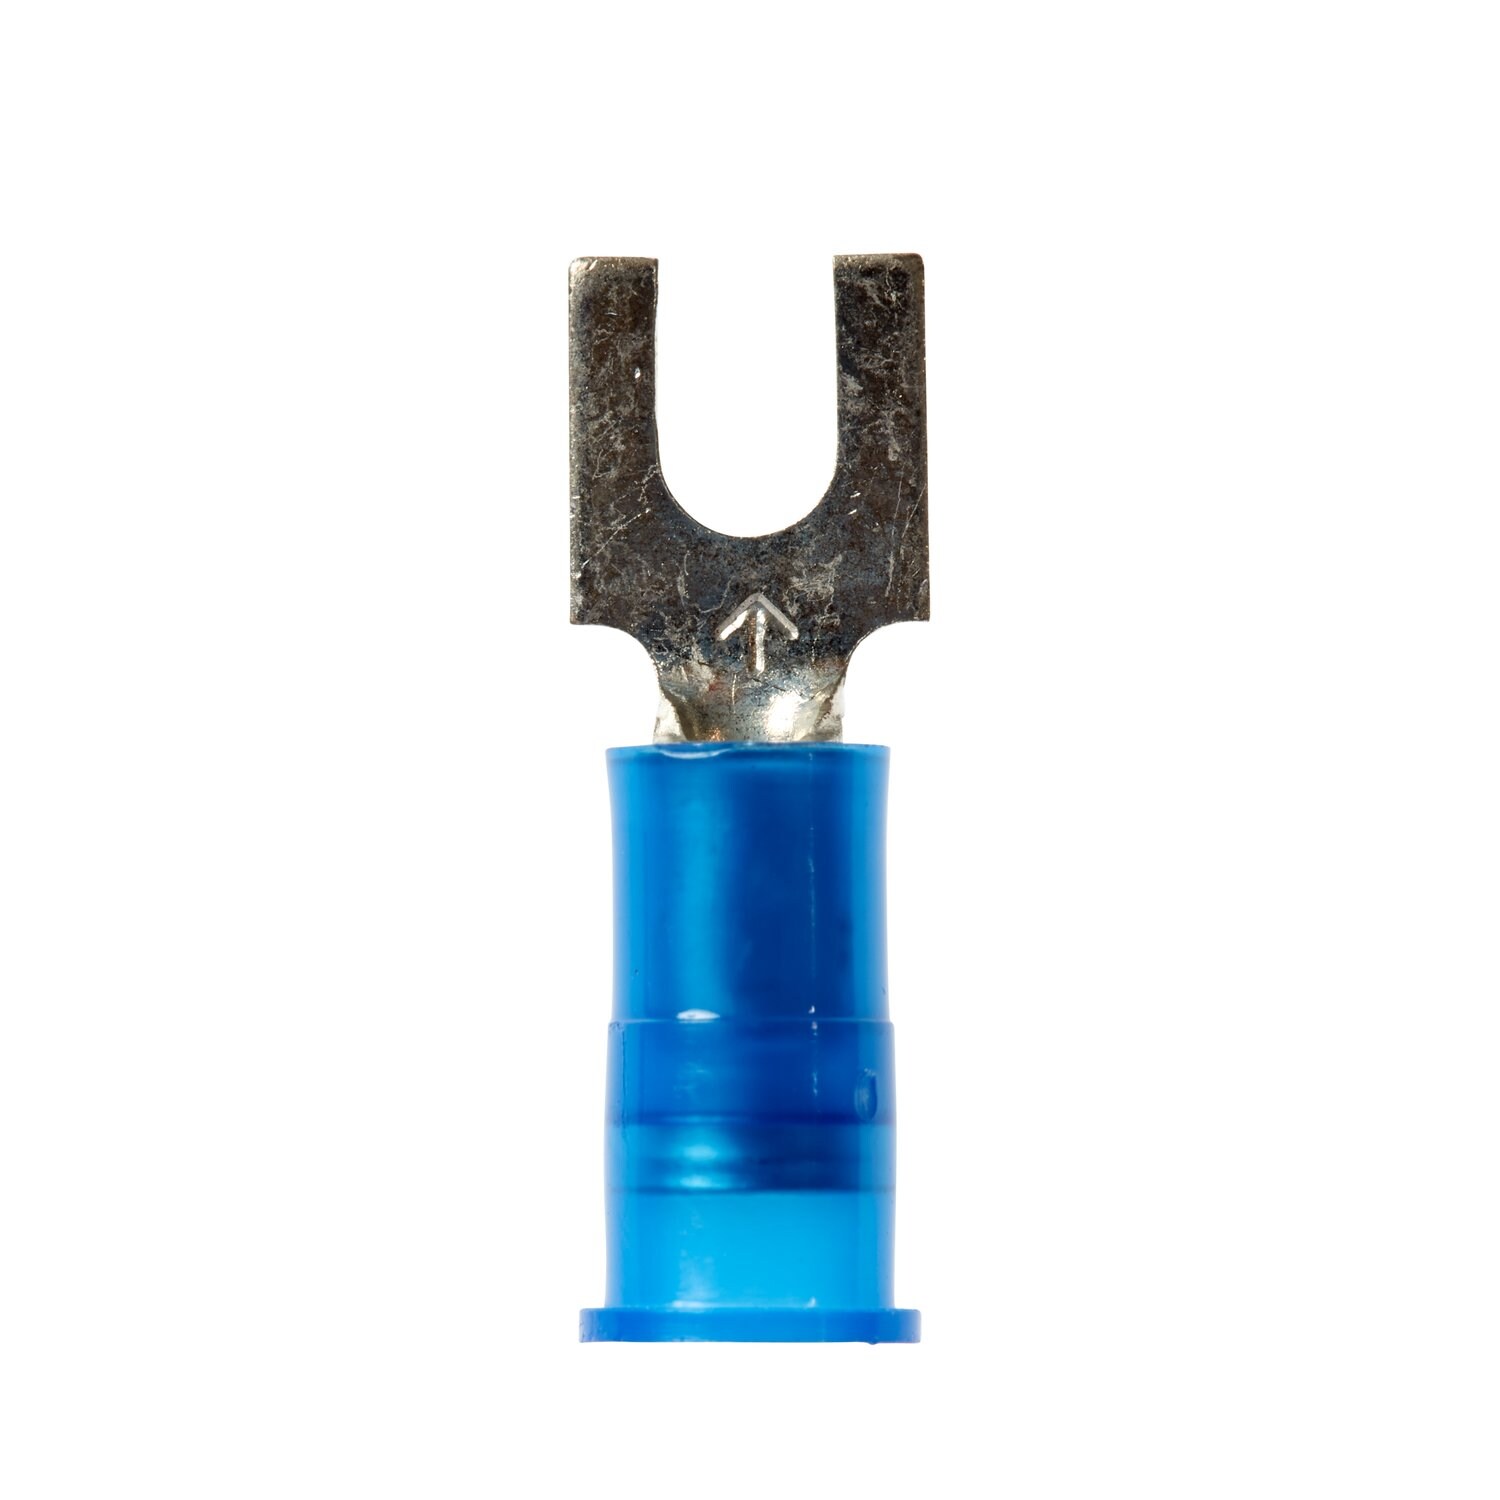 7000133306 - 3M Scotchlok Block Fork Nylon Insulated, 100/bottle, MNG14-6FBX,
suitable for use in a terminal block, 500/Case